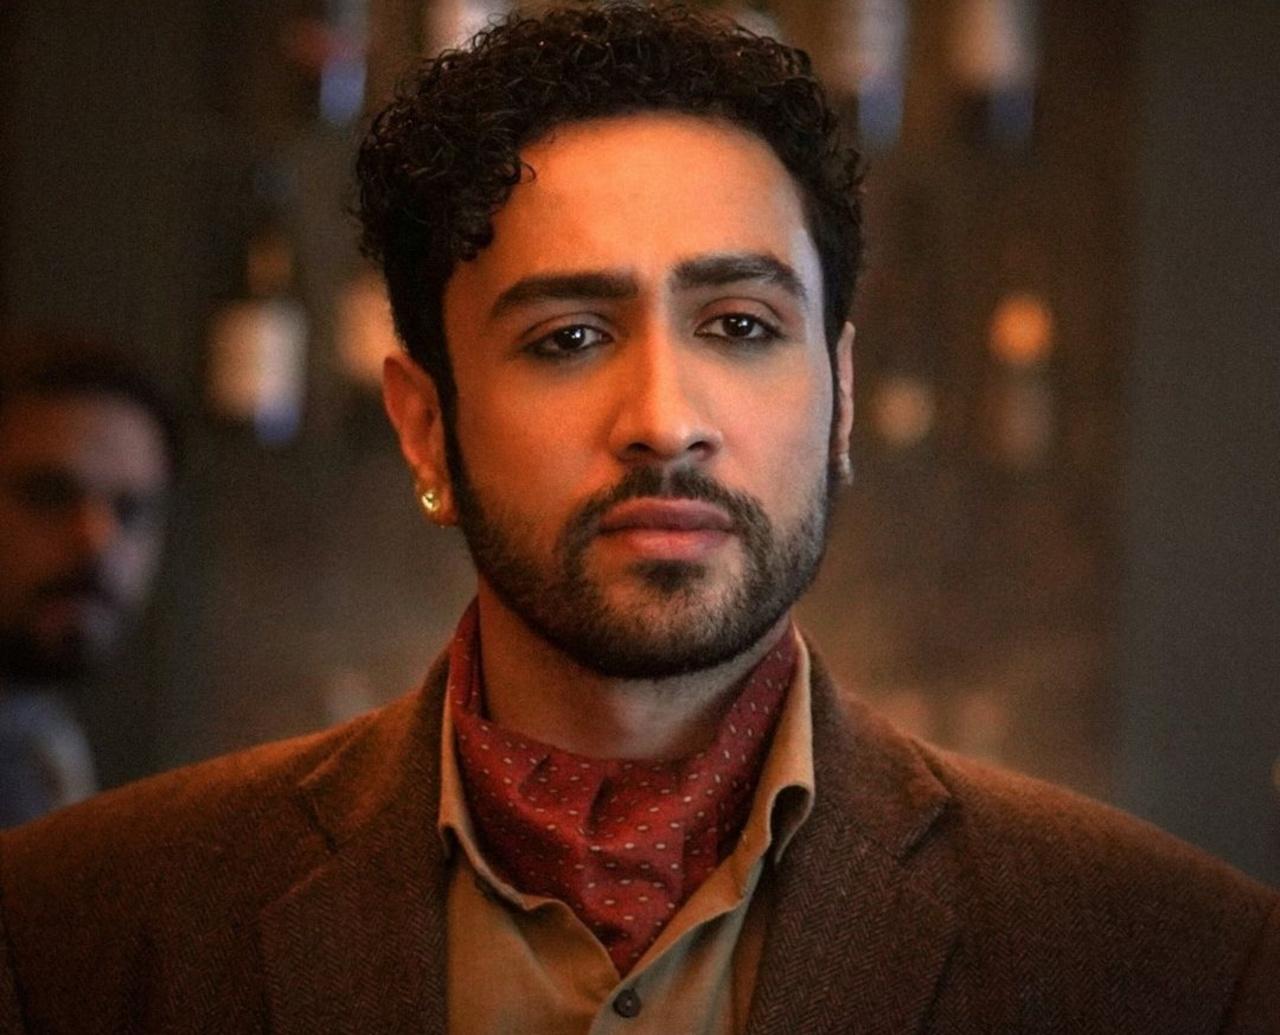 Adhyayan Suman portrays Zorawar Ali Khan, an arrogant nawab of considerable wealth whose pursuits are driven solely by his self-interest.